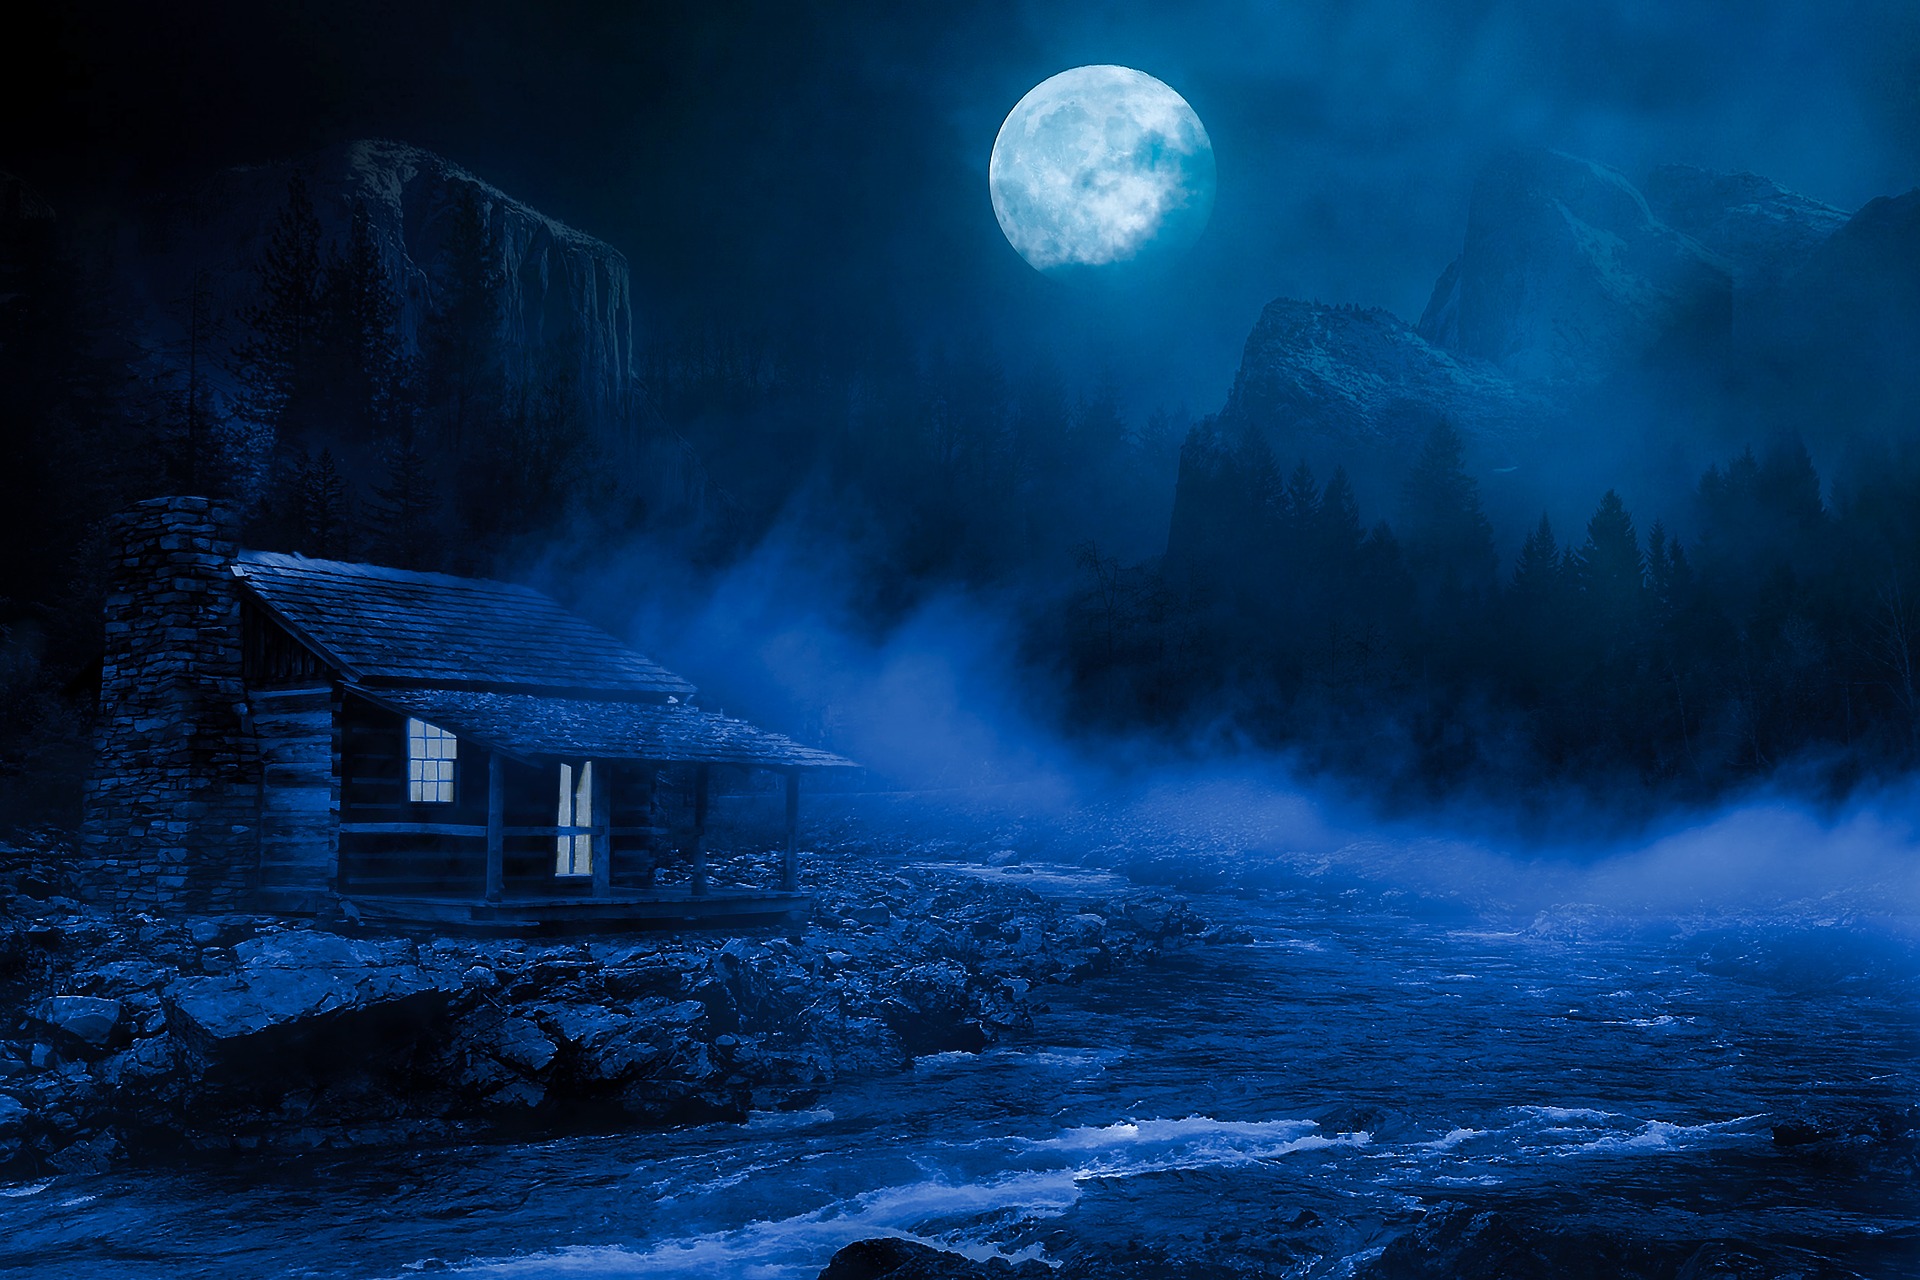 Moon shining during night over a hut near the river